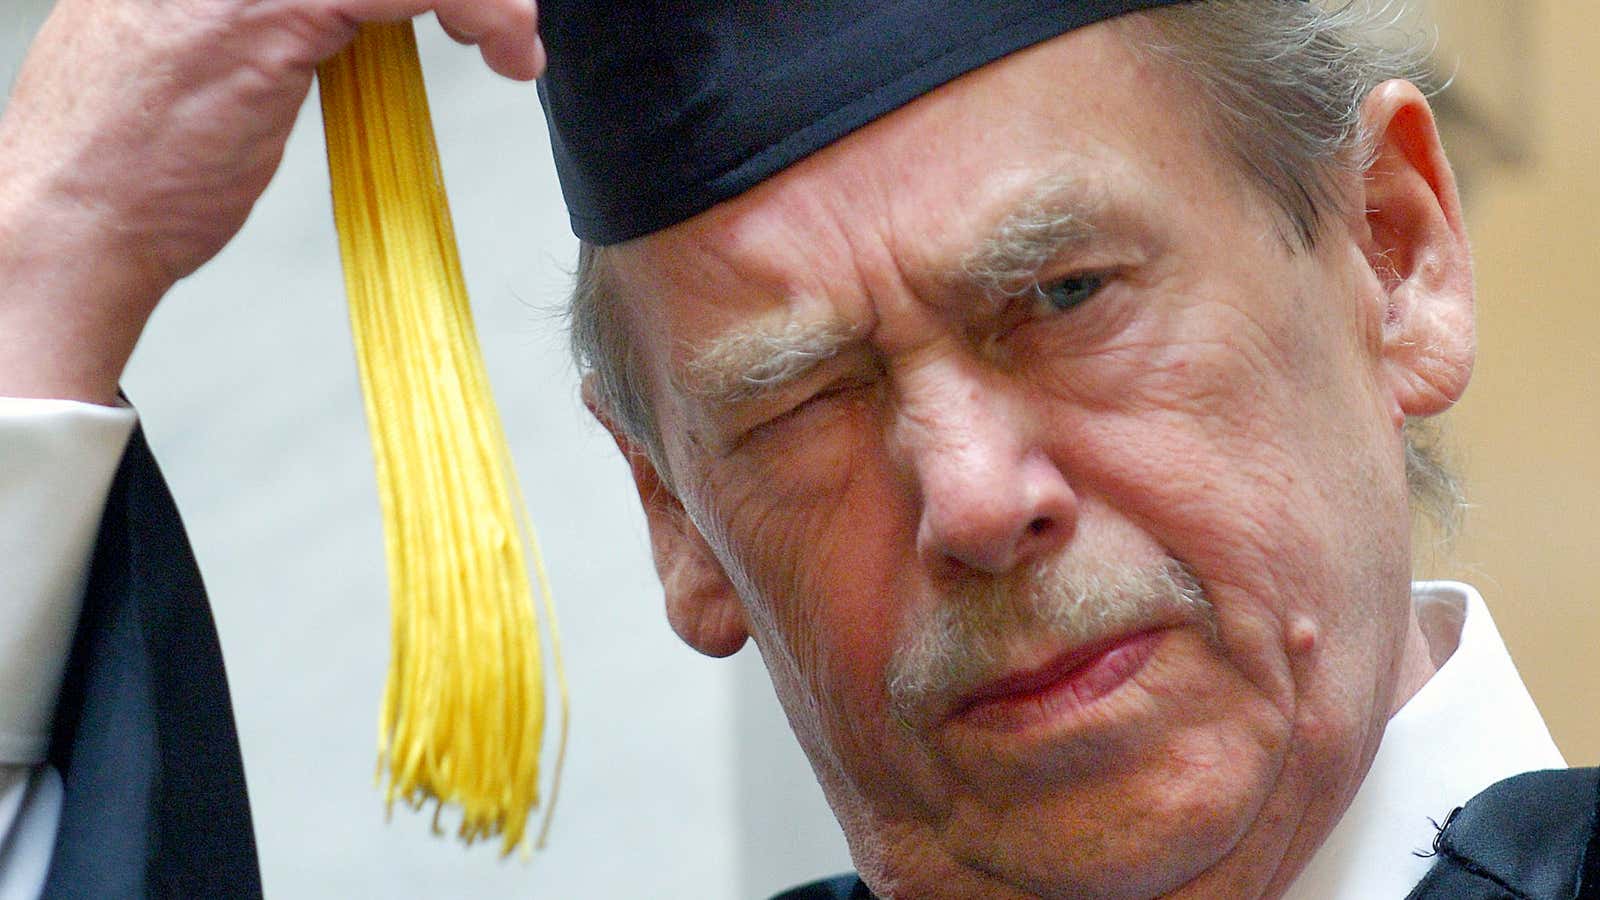 Vaclav Havel might be rethinking that honorary doctorate from Thunderbird.